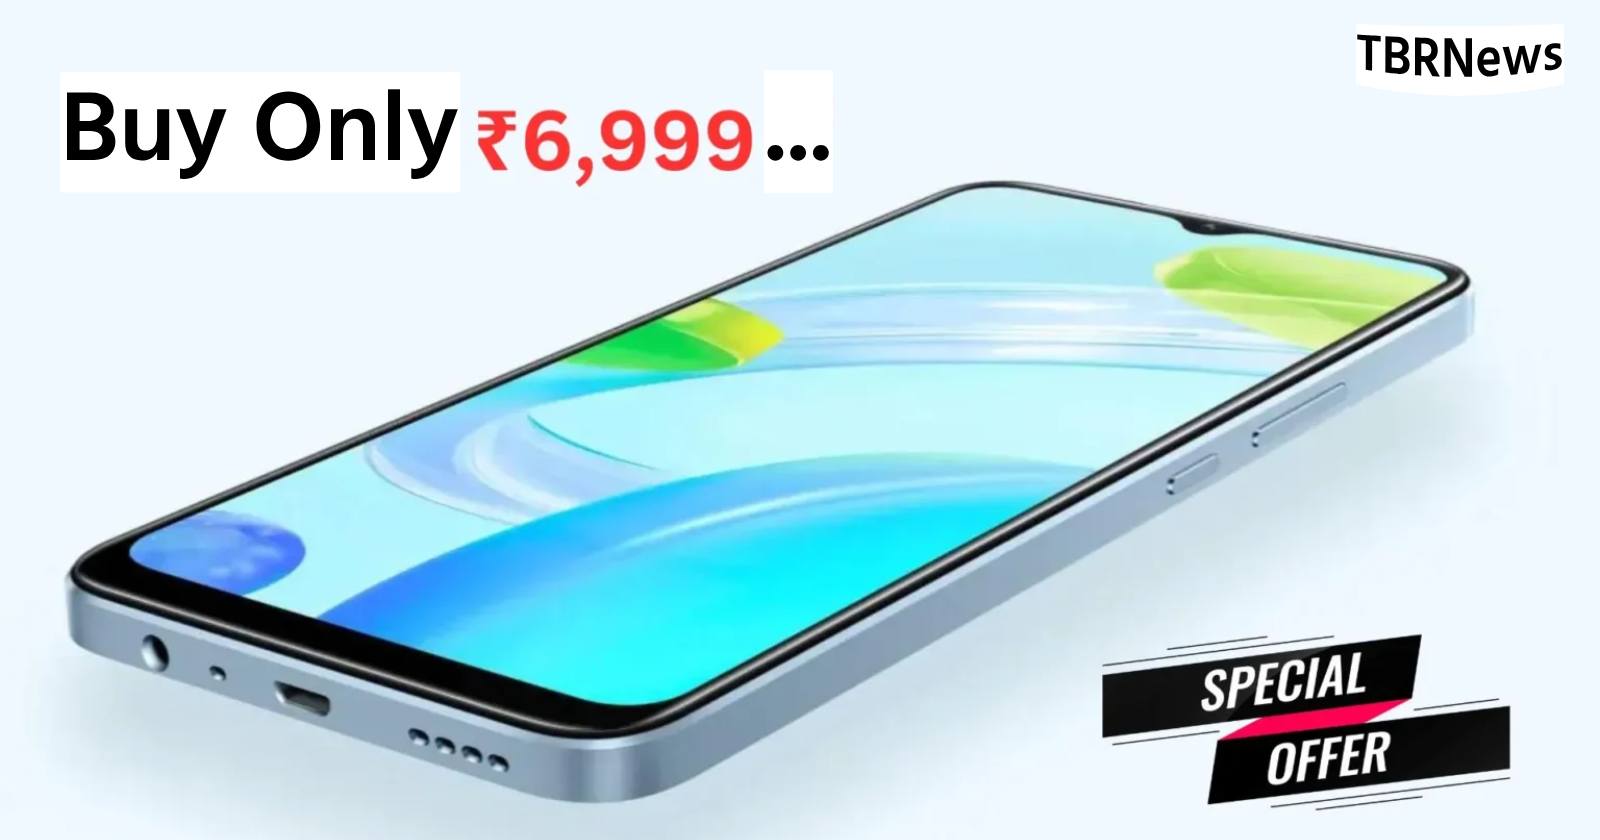 5G Smartphone at Just ₹6,999 – Comes Packed with a DSLR-Grade Camera and 5000mAh Battery, Limited Offer for Discerning Buyers